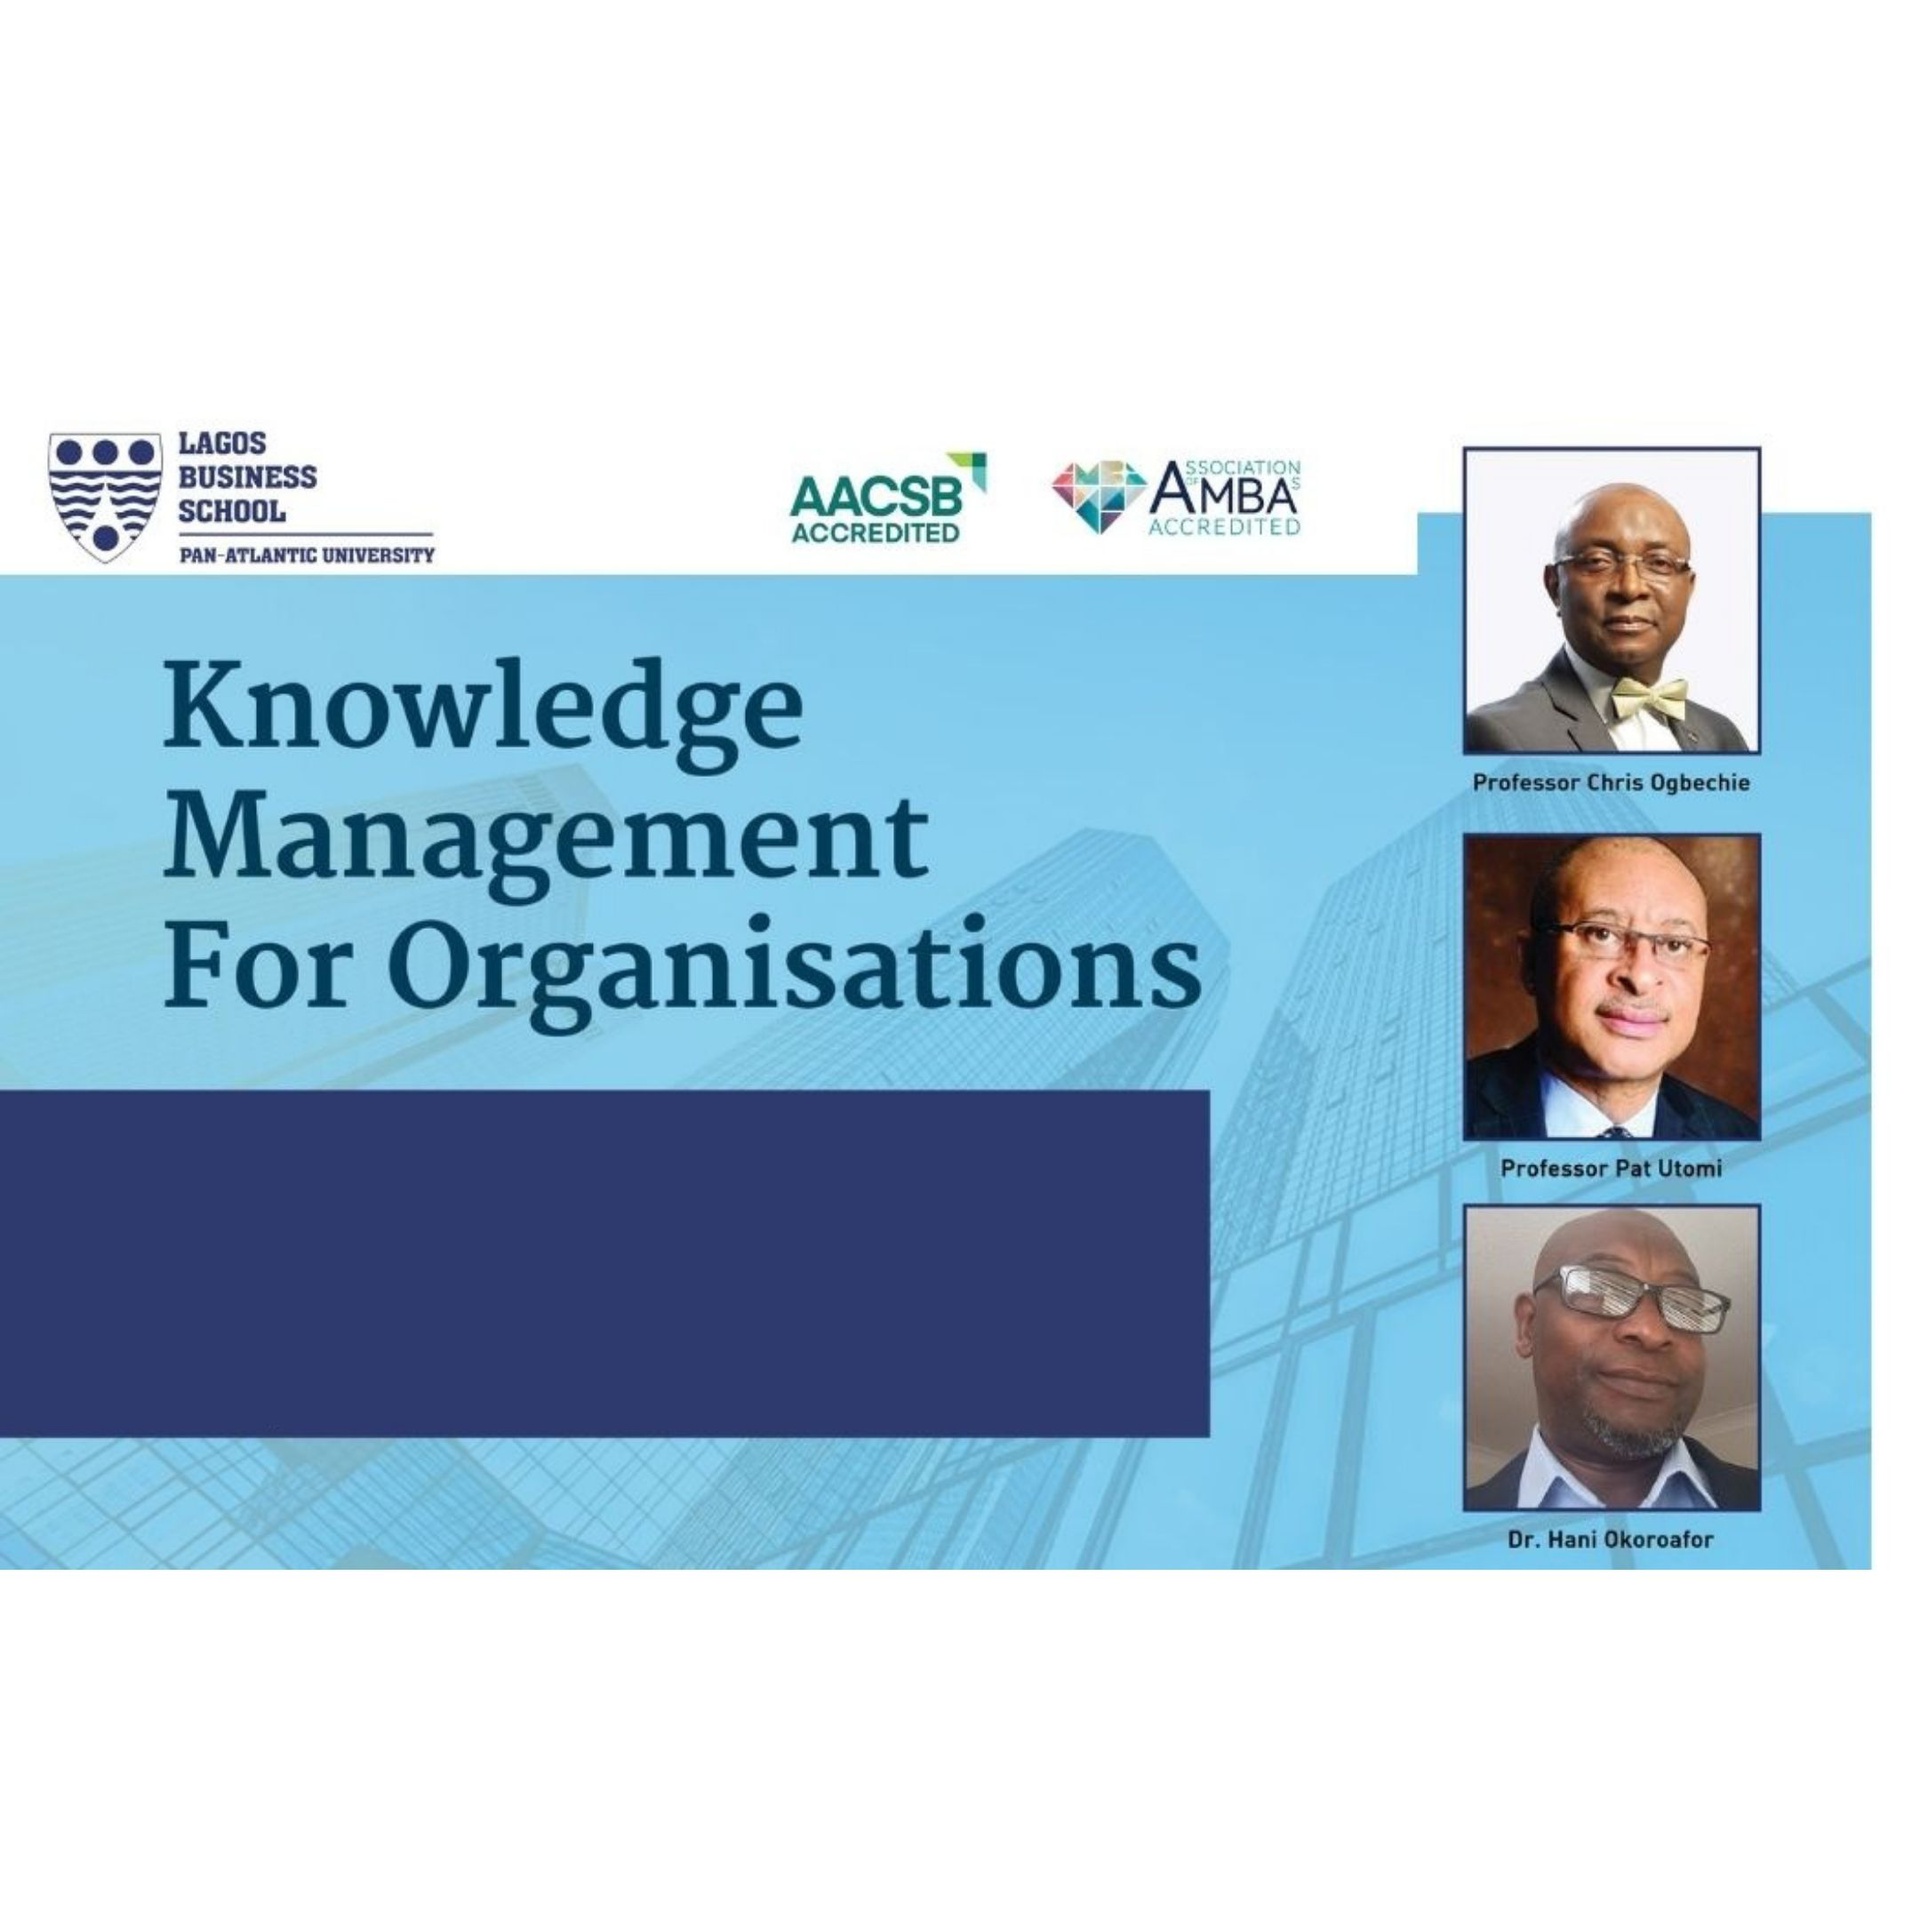 Knowledge Management for Organisations